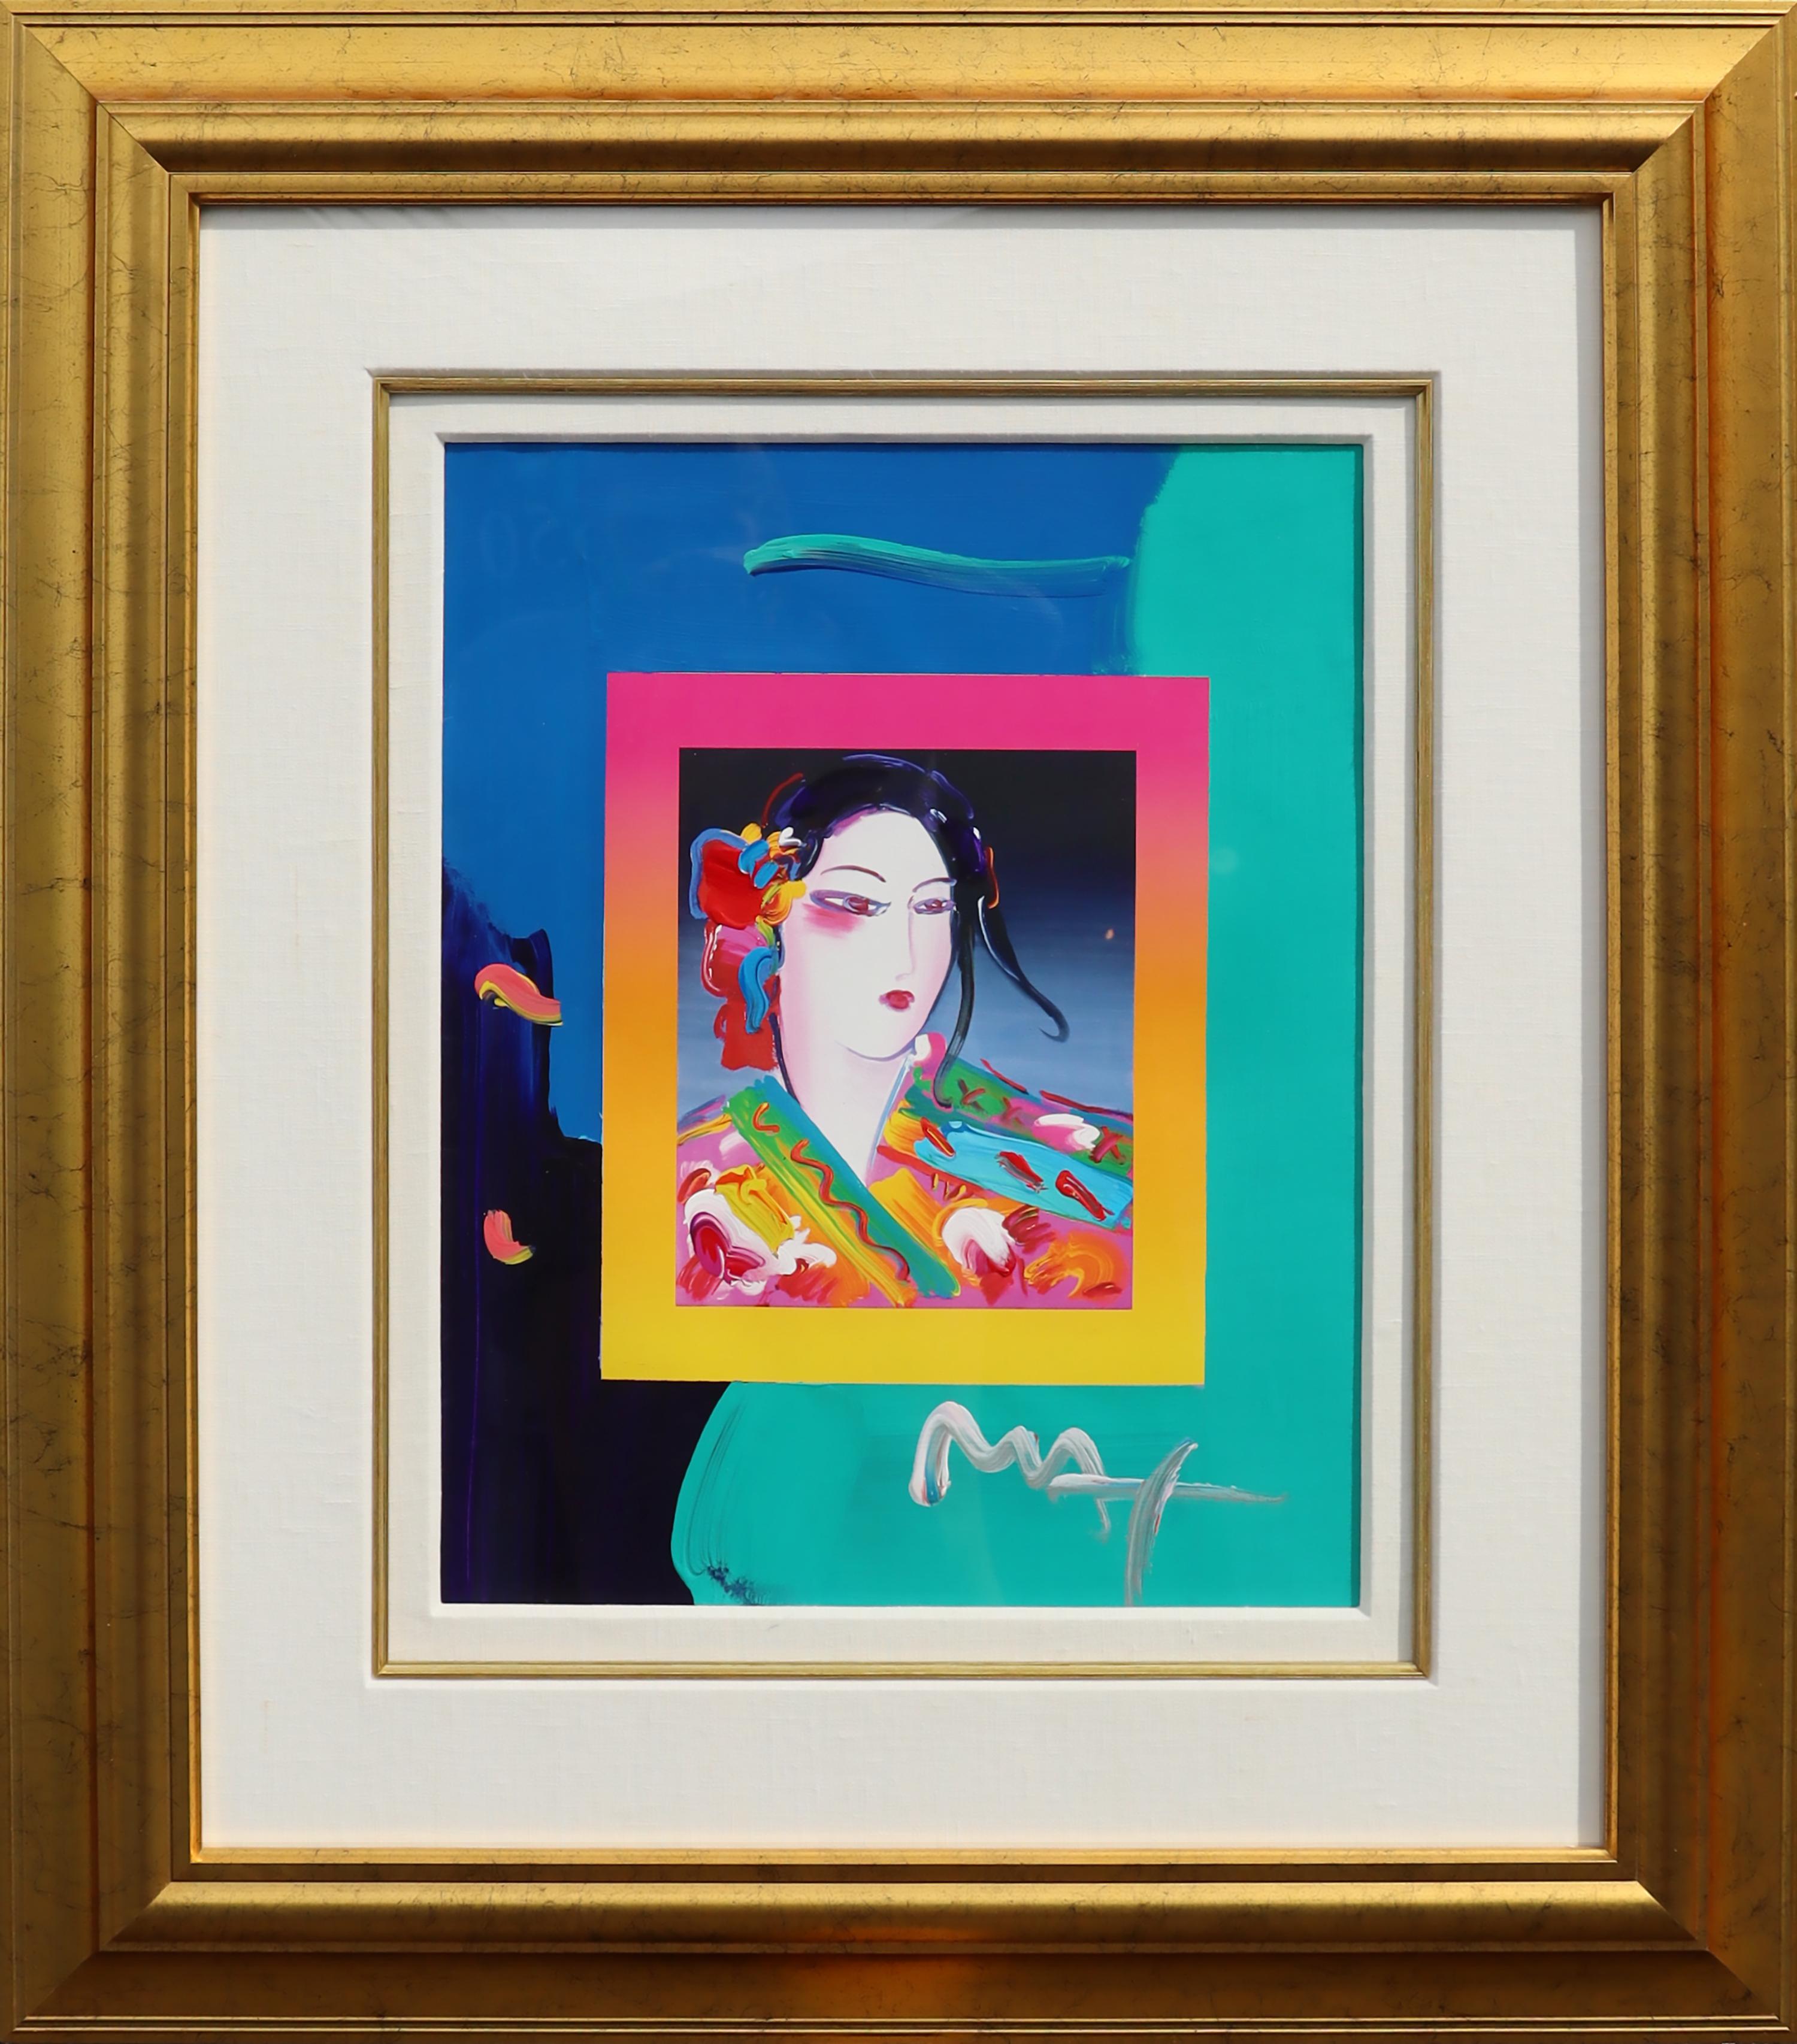 Asia on Blends - Modern Mixed Media Art by Peter Max